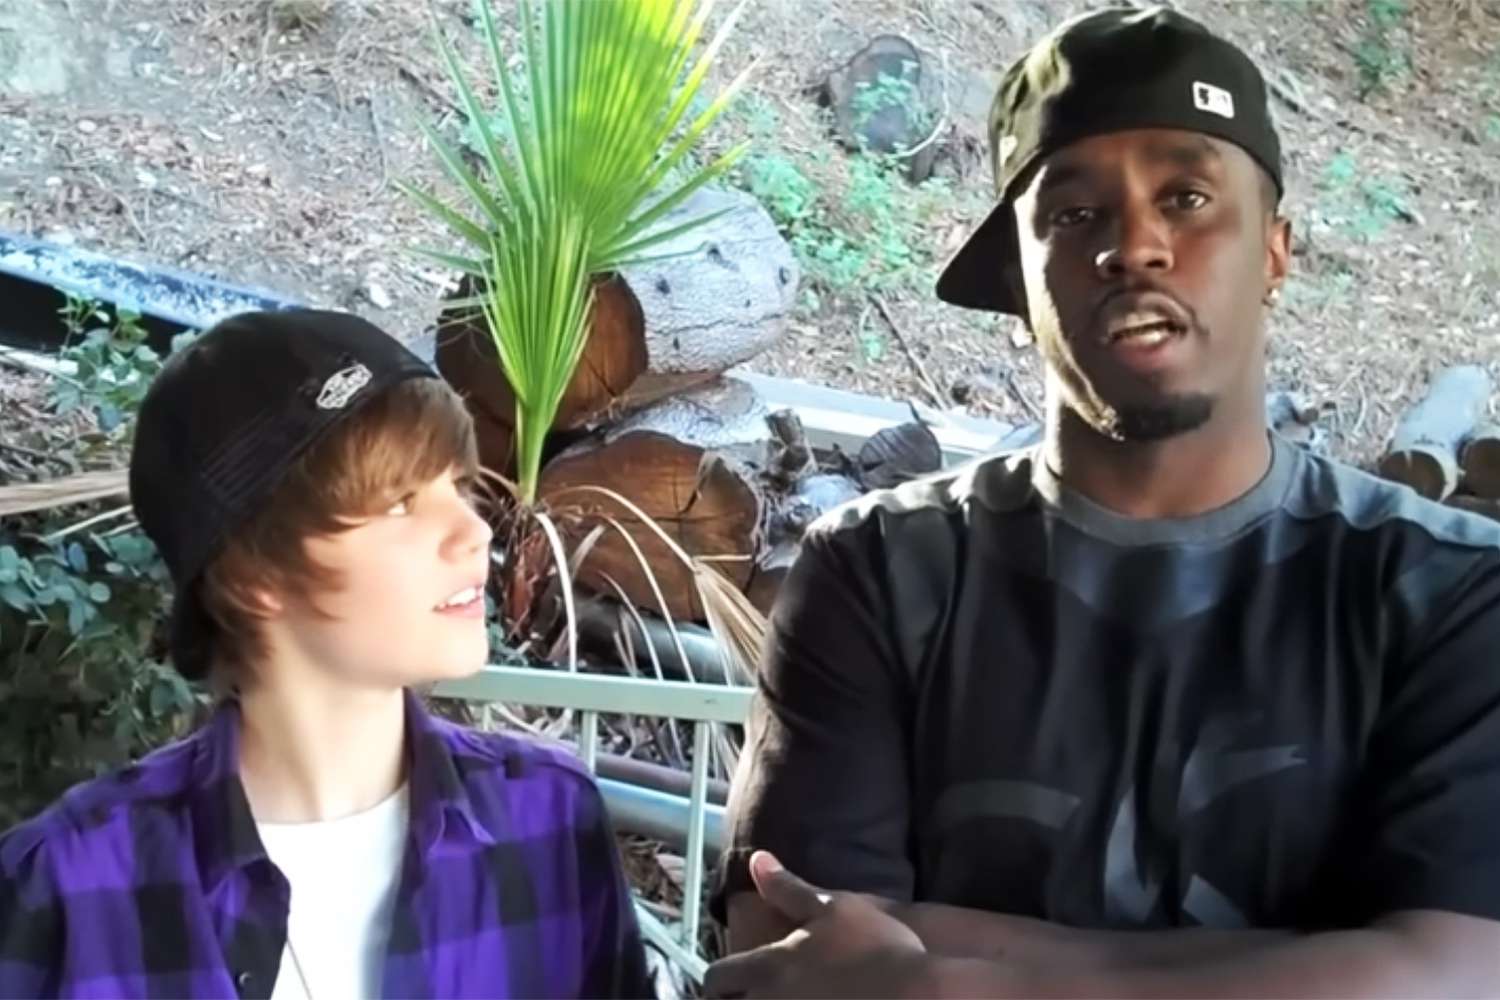  Sean 'Diddy' Combs and 15-Year-Old Justin Bieber Discuss Going to 'Get Some Girls' in Resurfaced Video